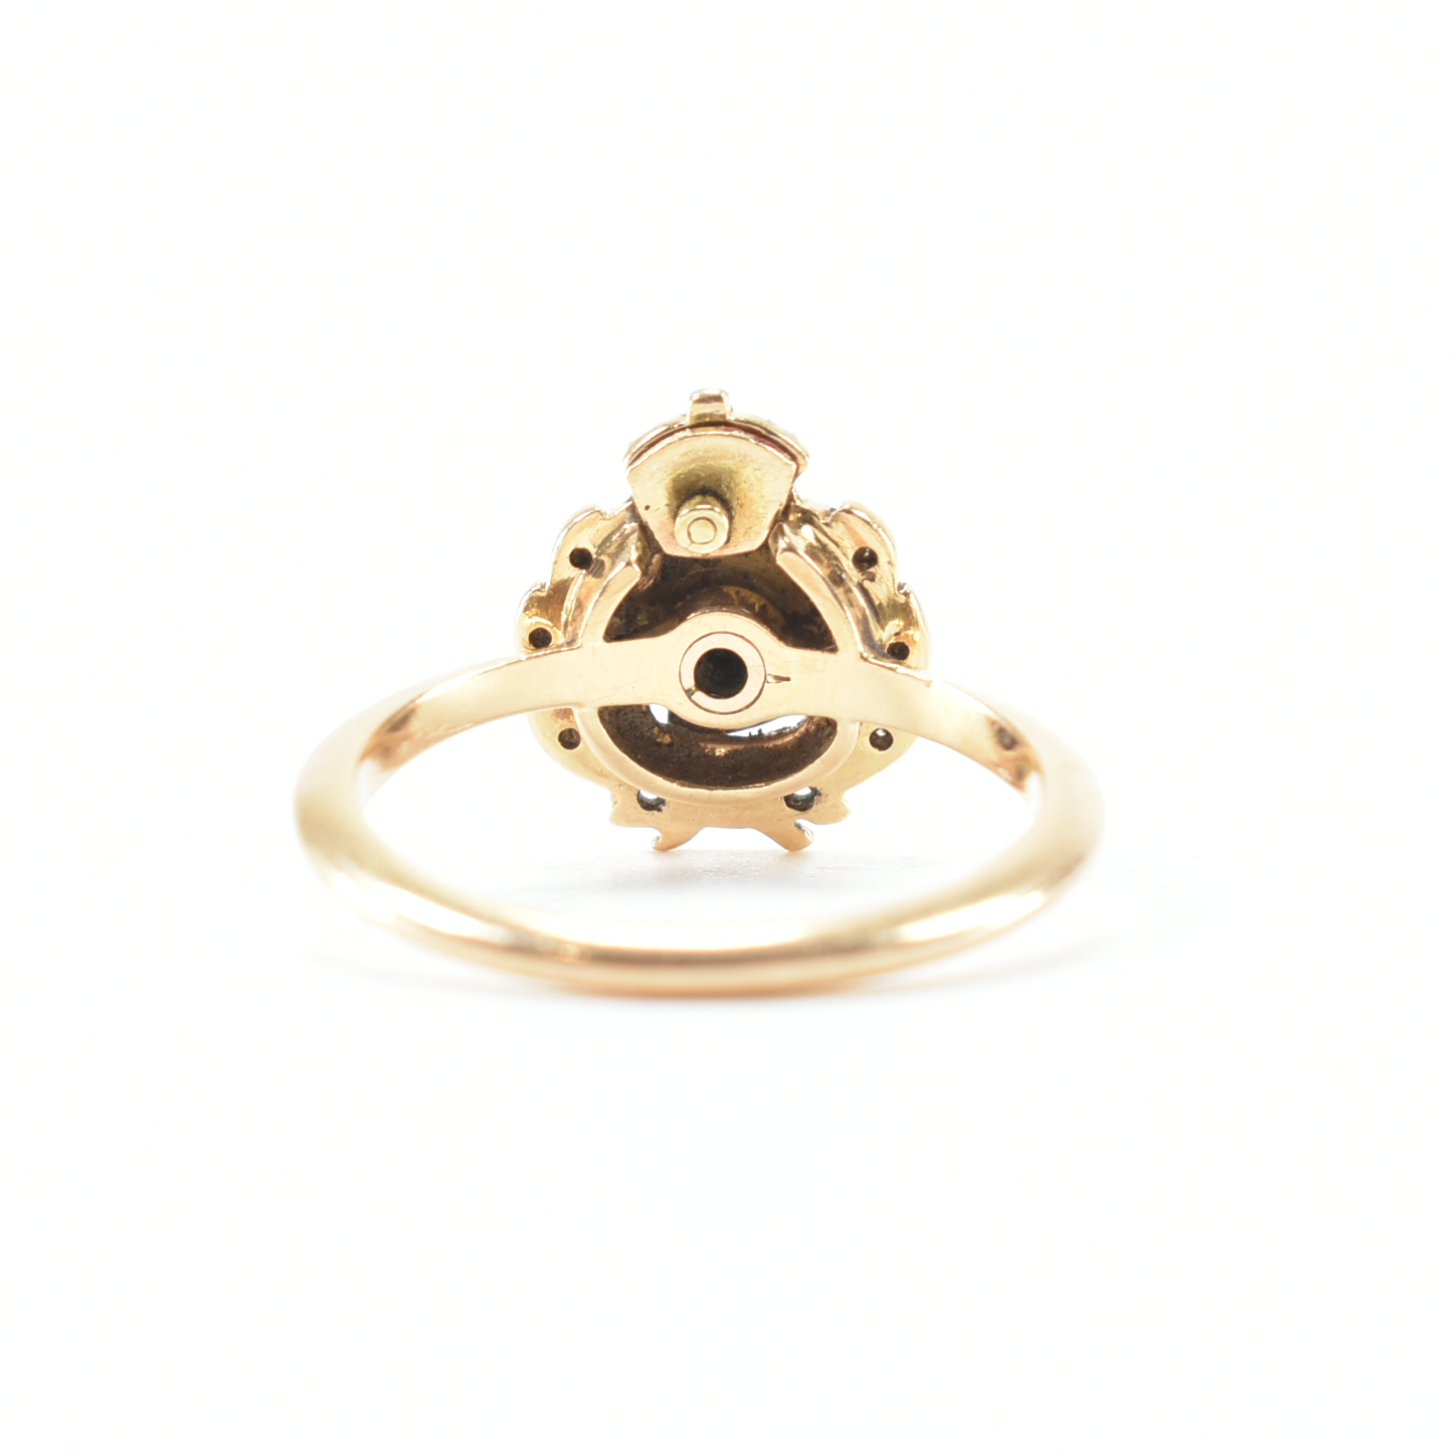 GEORGE VI GOLD & DIAMOND MILITARY SWEETHEART RING - Image 4 of 7